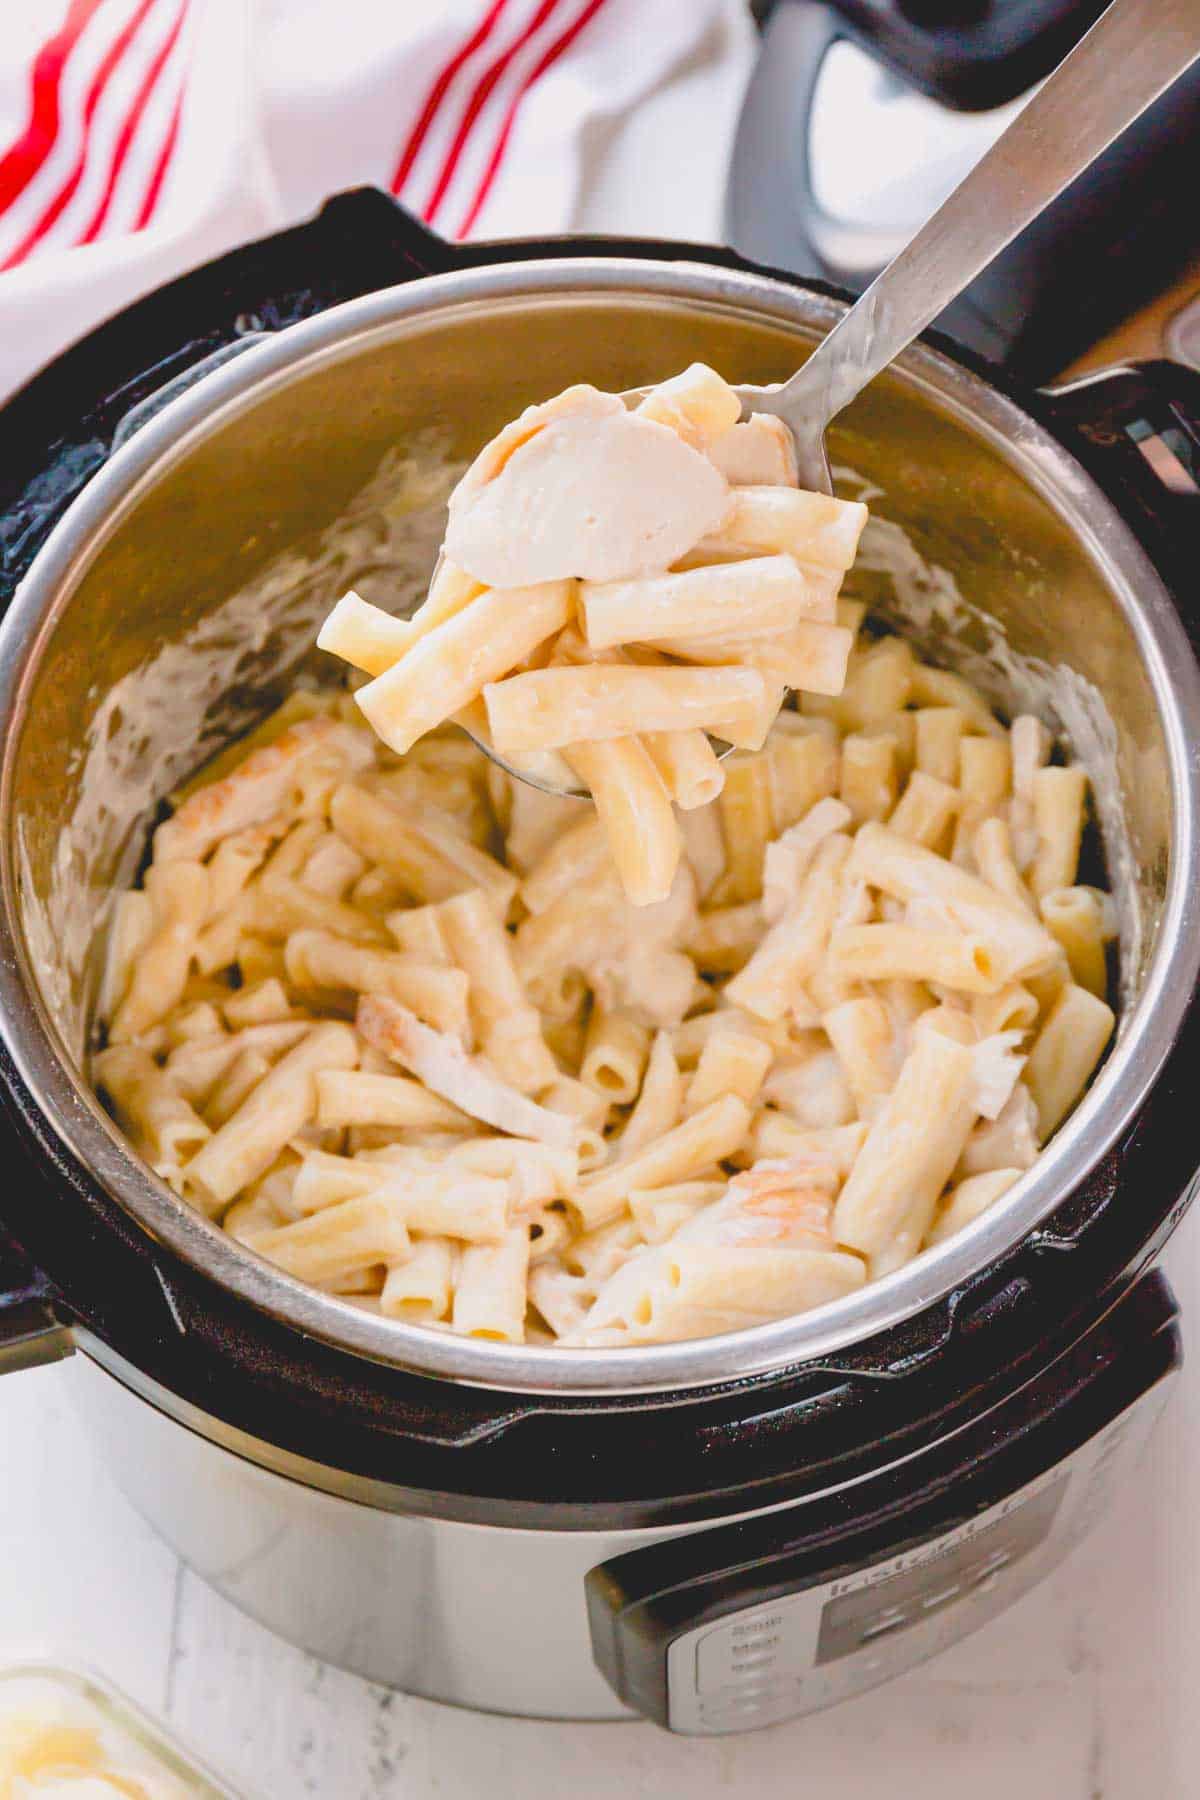 A spoon lifting a scoop of Instant Pot chicken alfredo pasta from the pot.